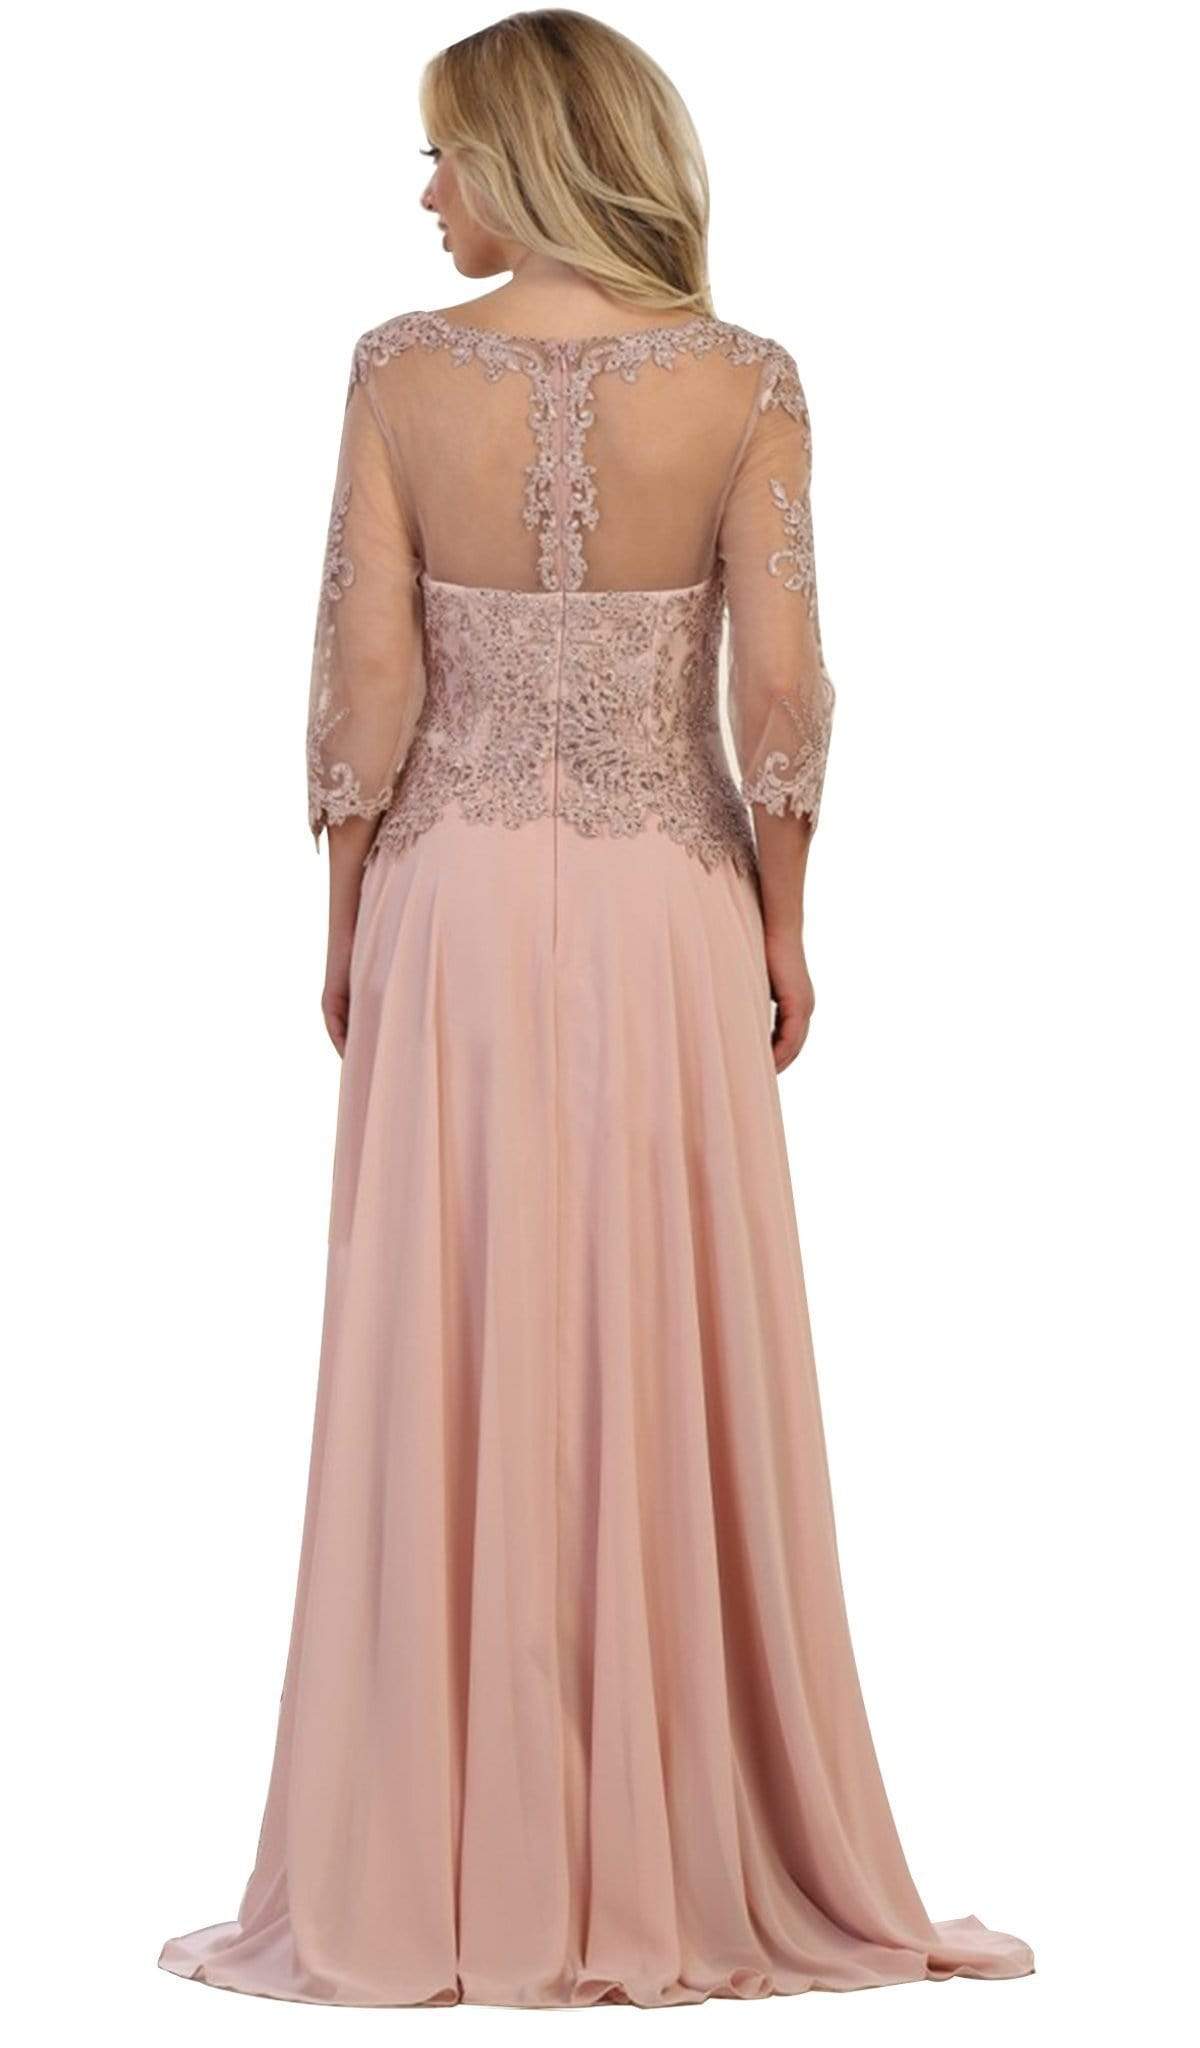 May Queen - MQ1484 Bedazzled Illusion Bateau Evening Dress Mother of the Bride Dresses